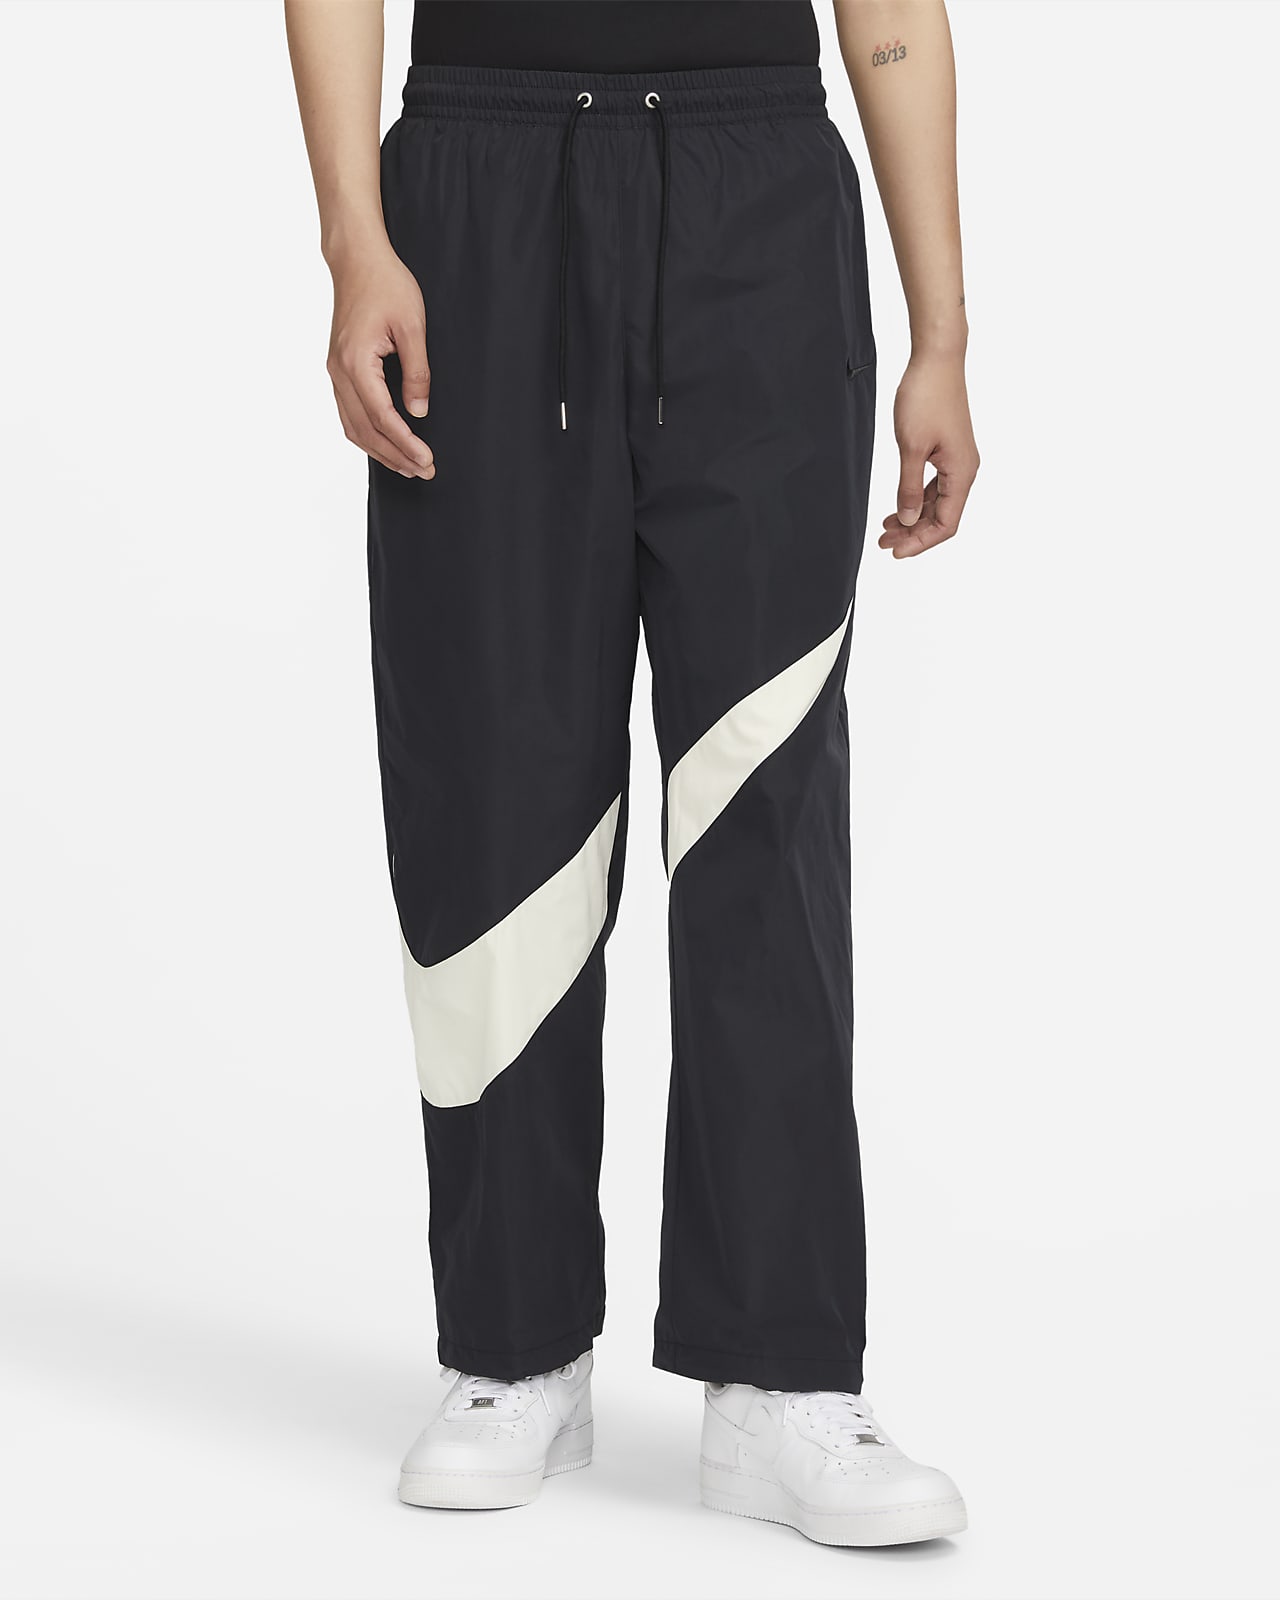 Nike y2k track pants | Guys clothing styles, Stylish mens outfits,  Streetwear men outfits